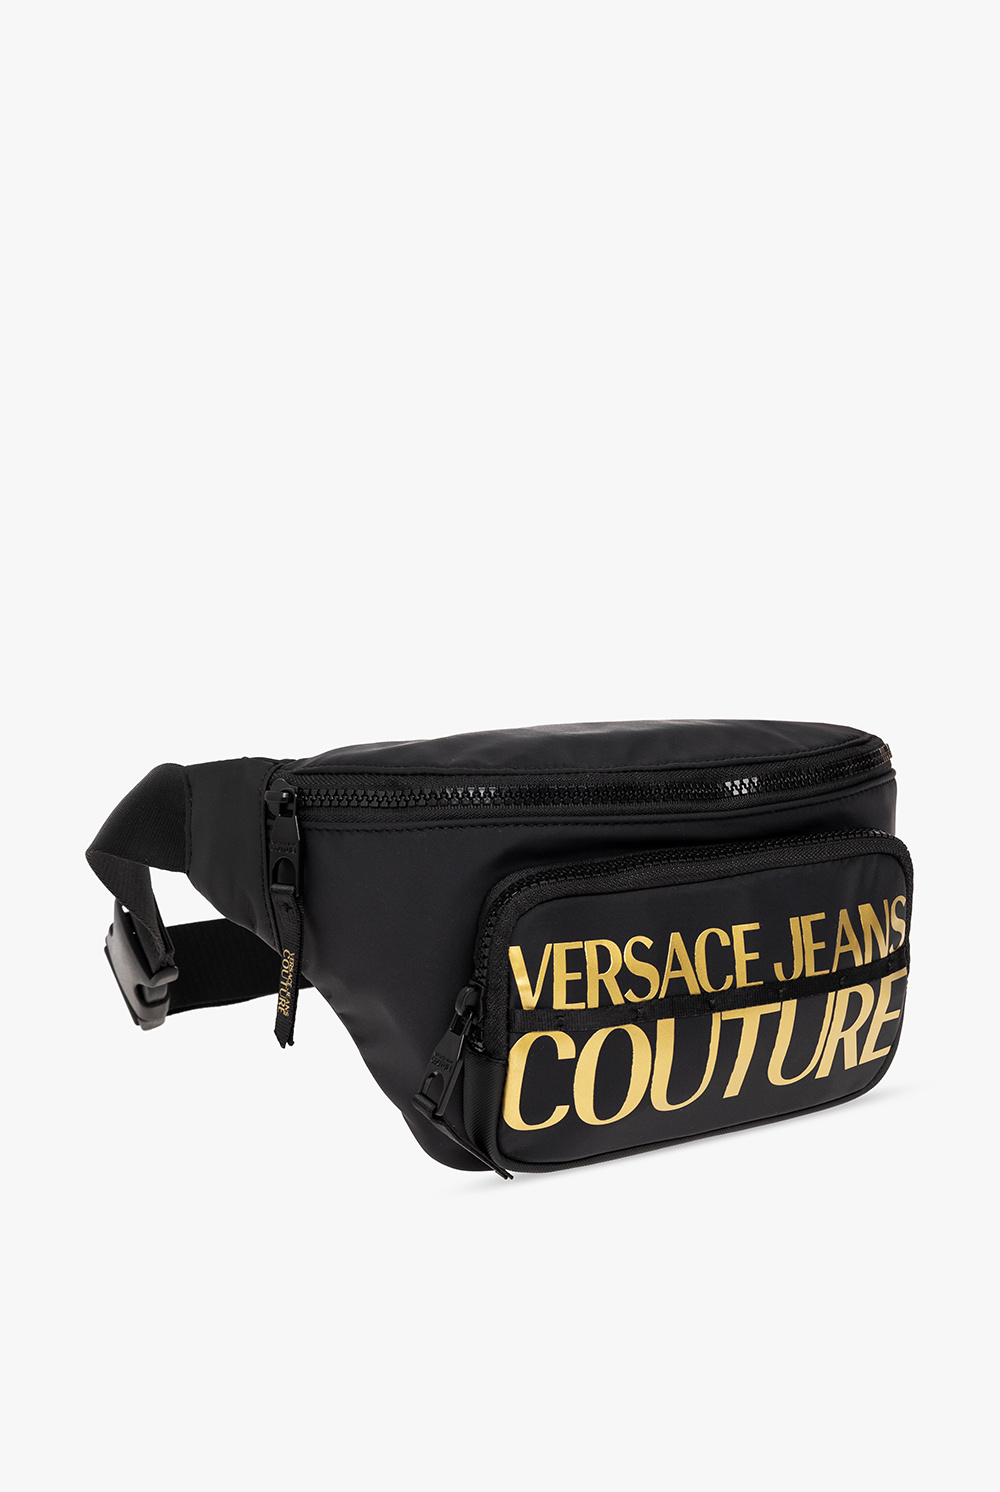 Versace Sold jeans Couture Belt bag with logo